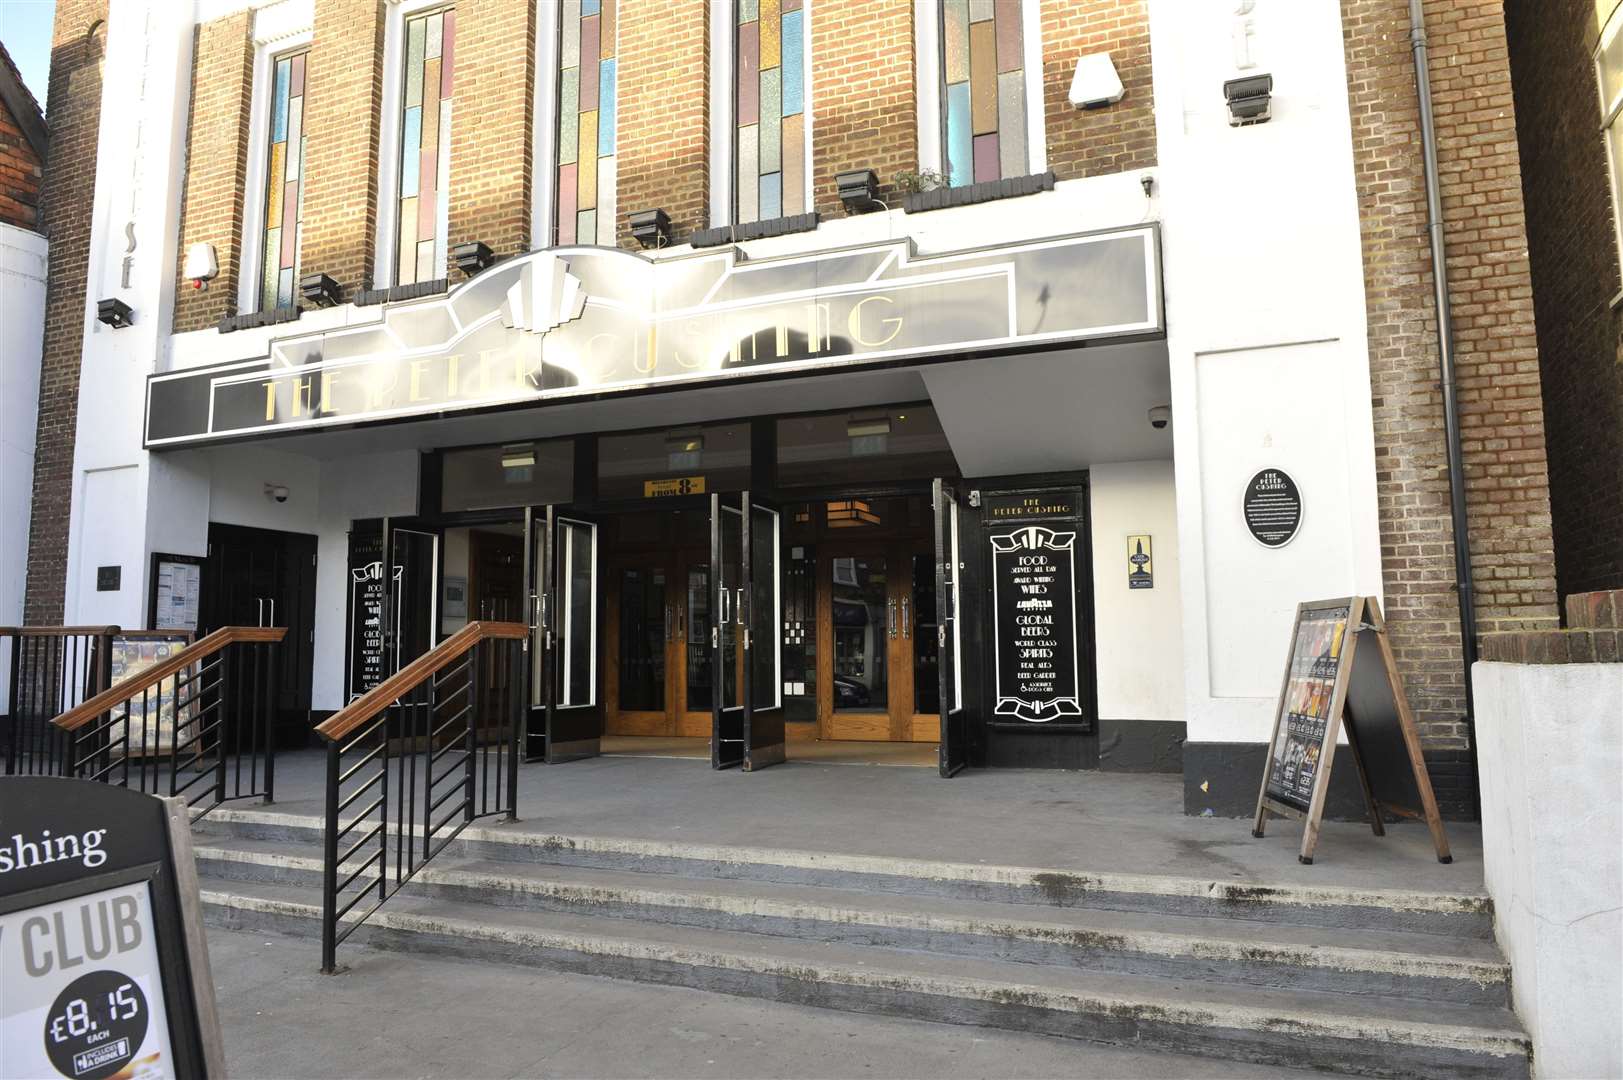 The Peter Cushing Wetherspoon pub opened in Whitstable in 2011